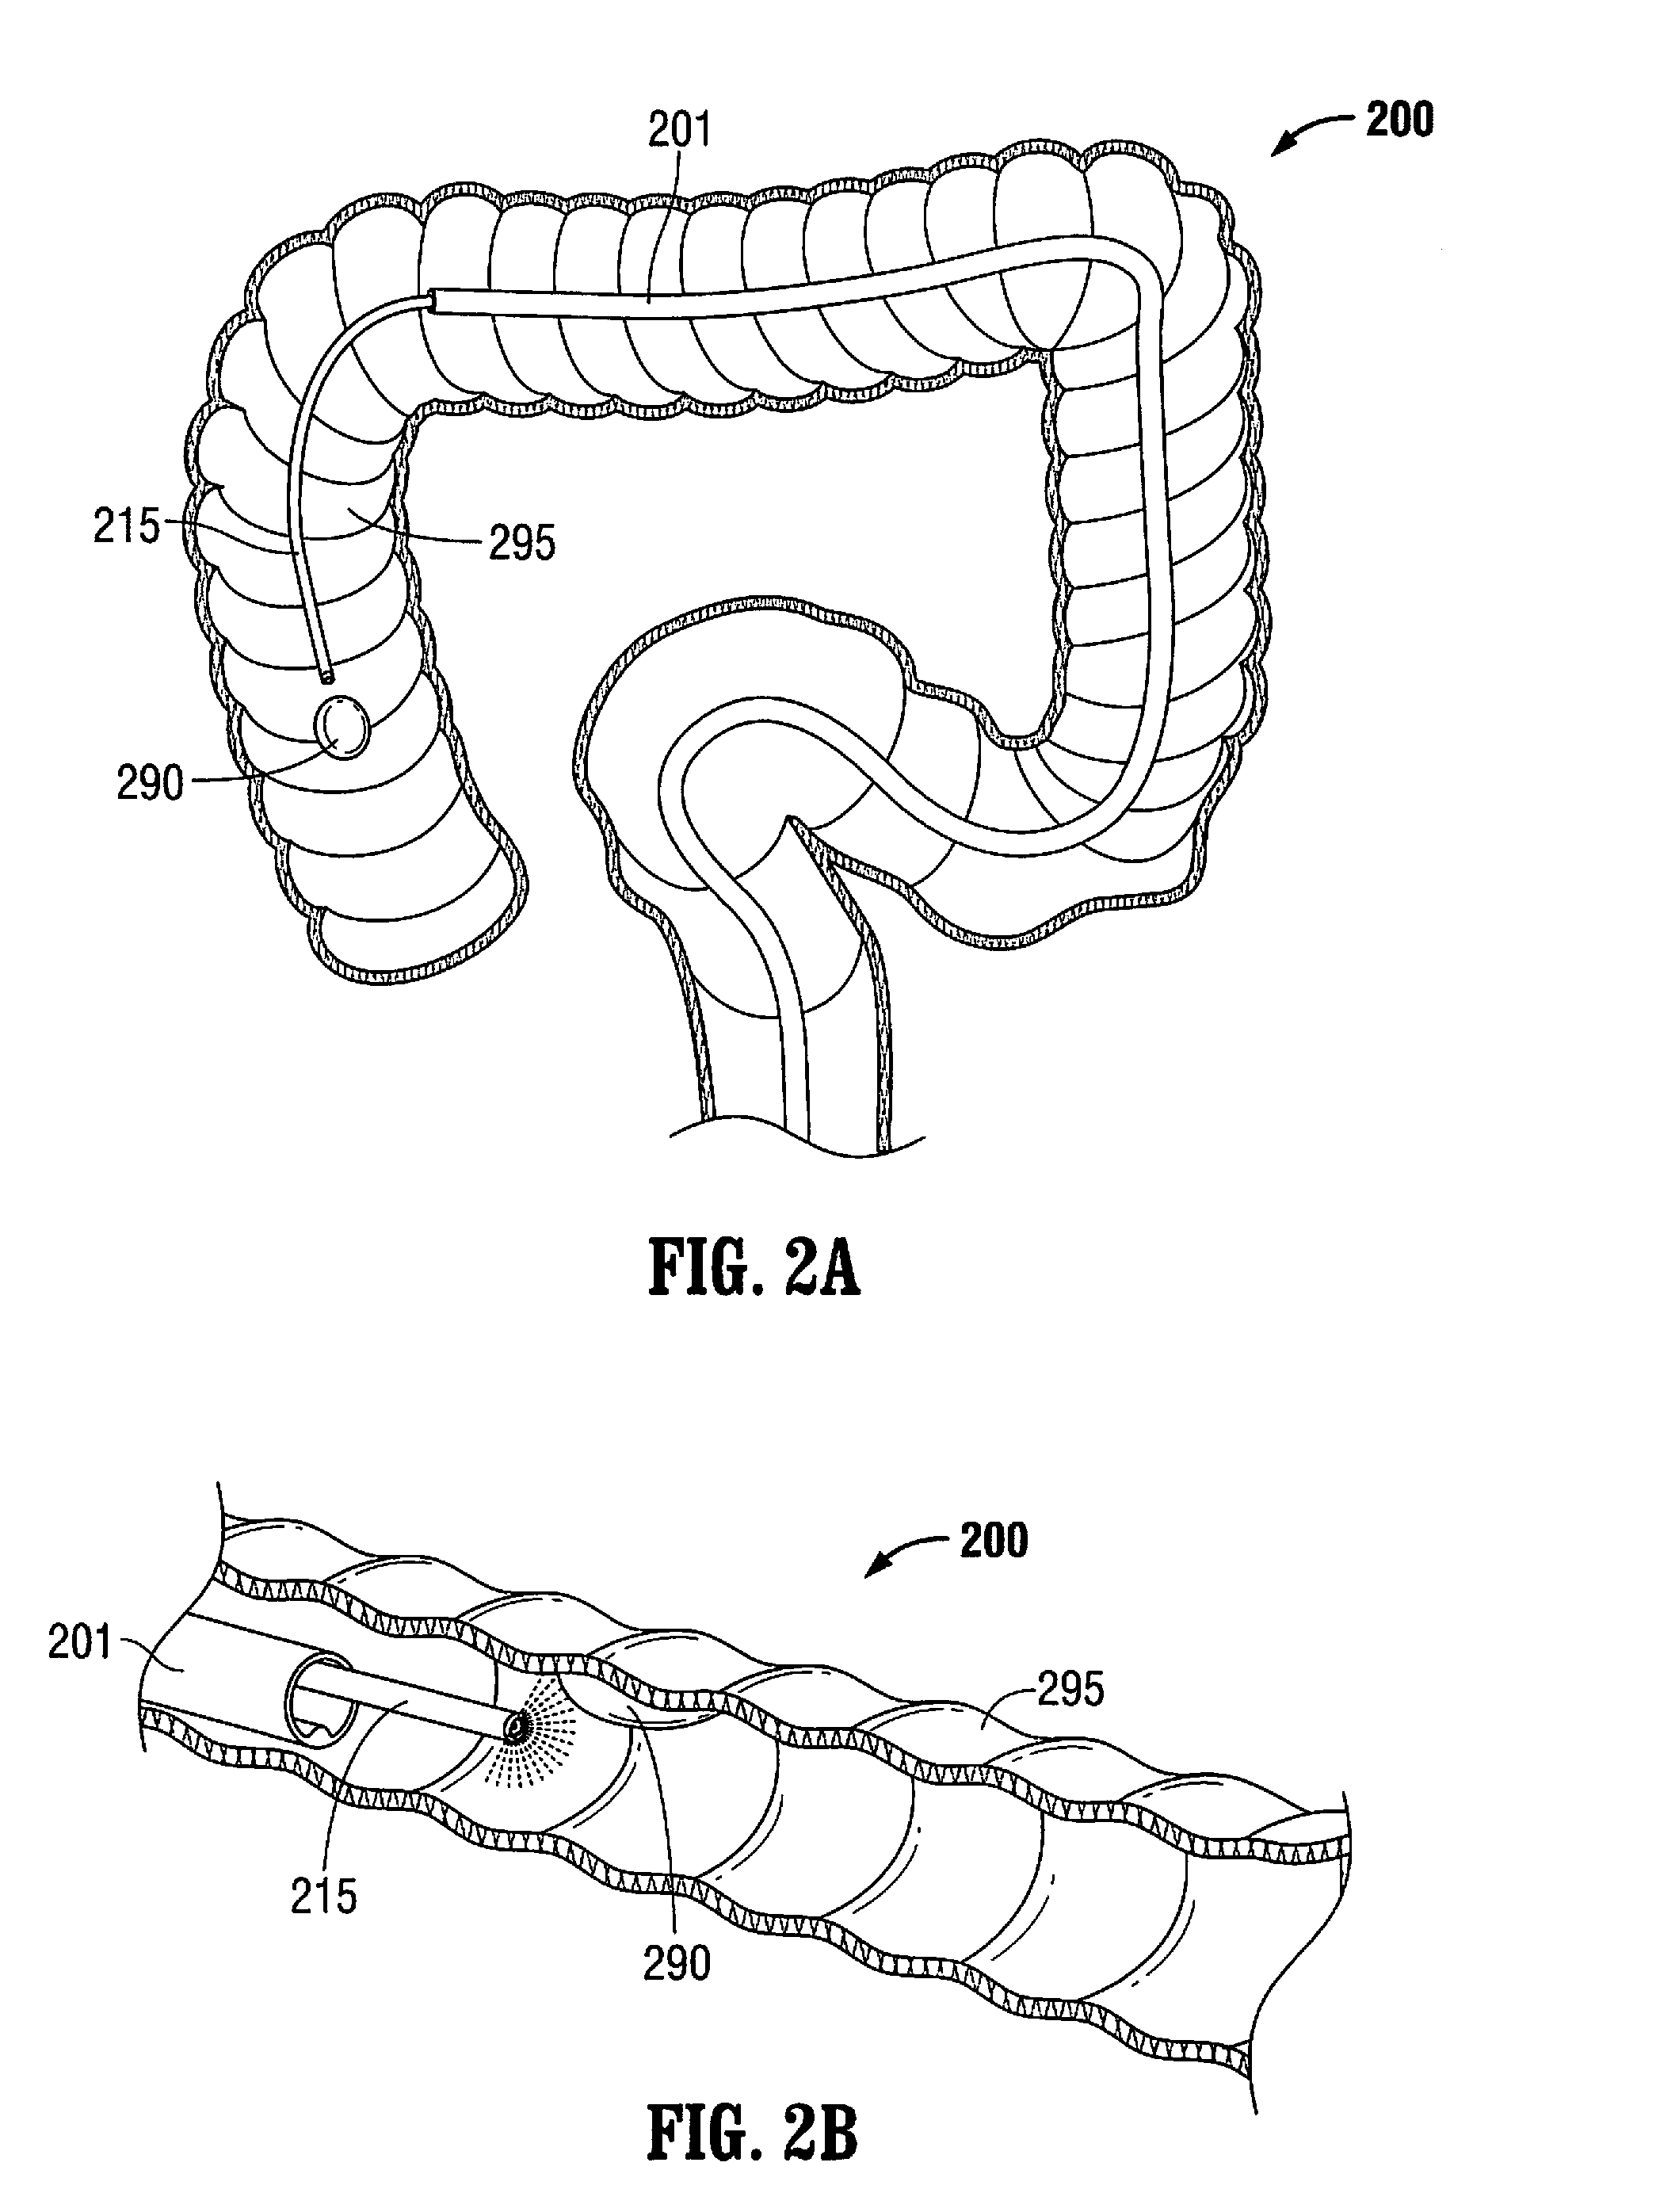 System for a minimally-invasive, operative gastrointestinal treatment